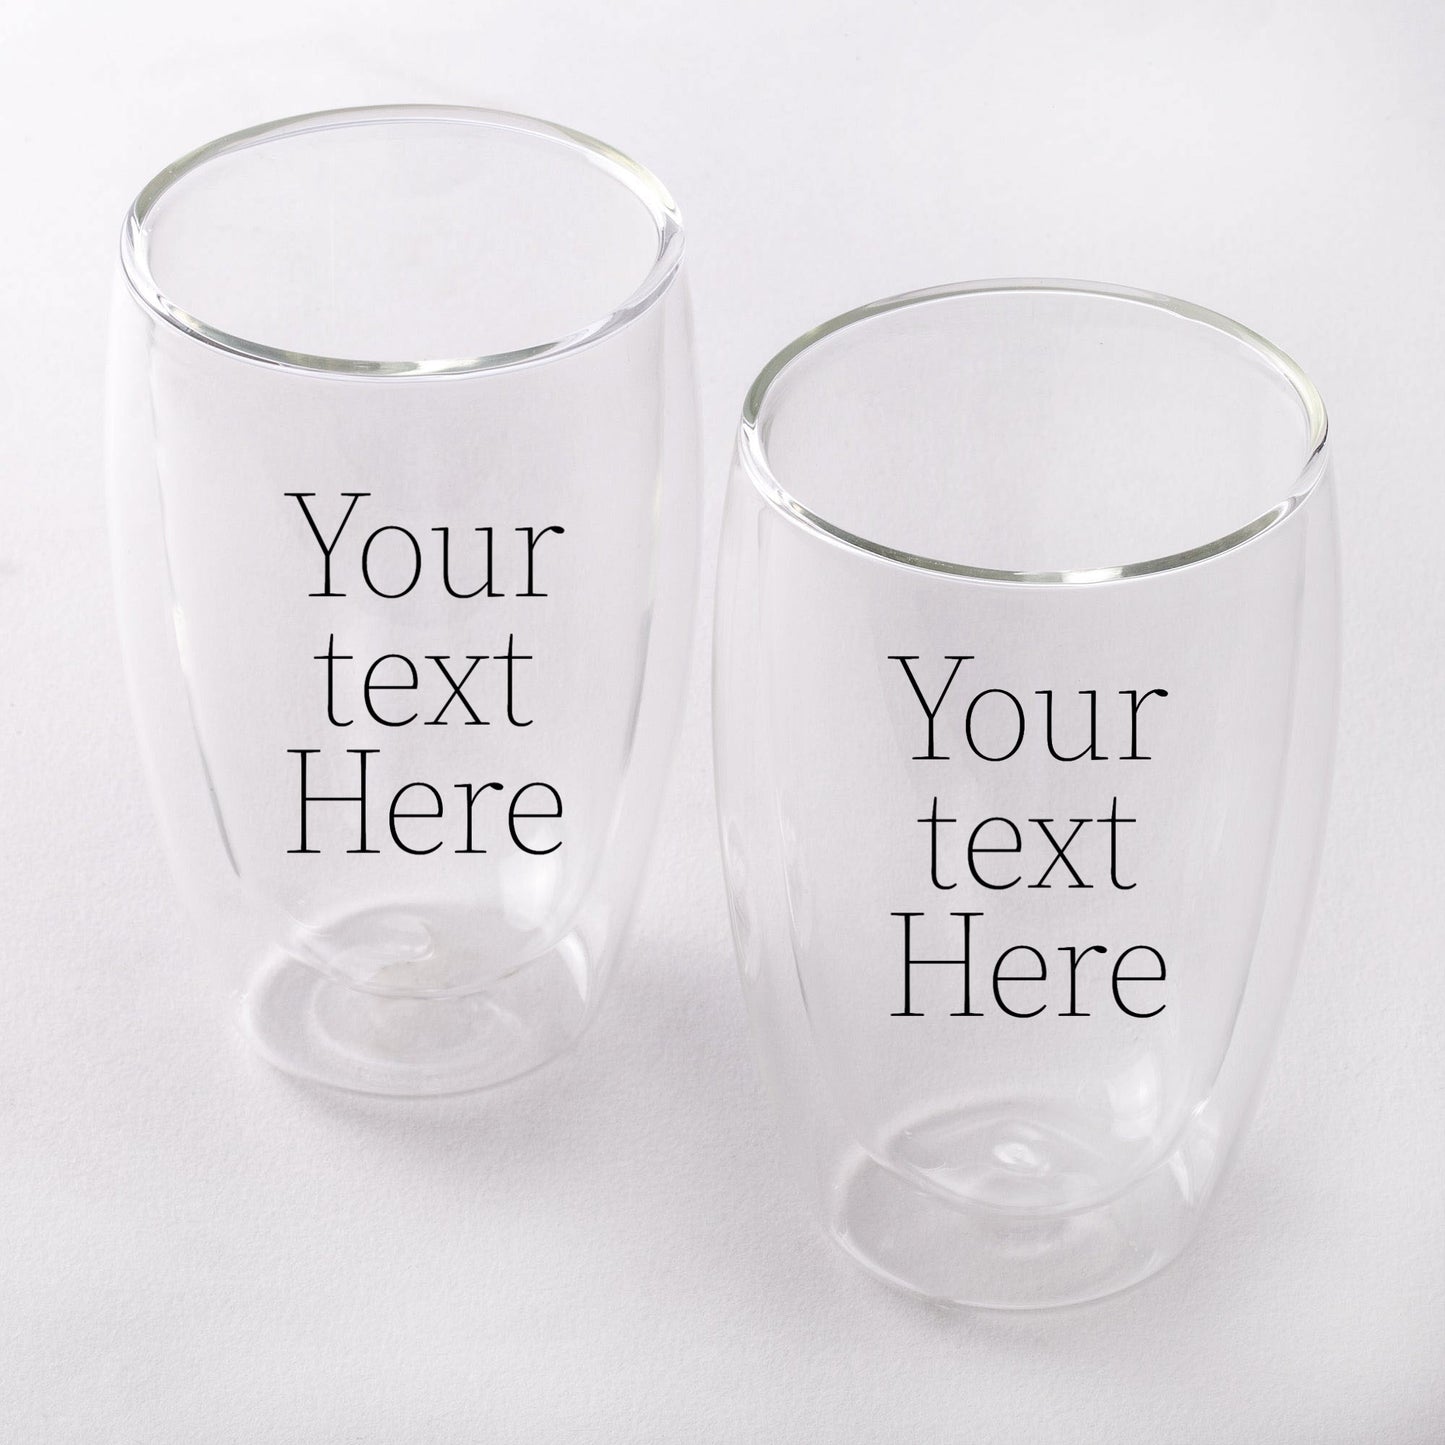 His & Hers Double walled Glass Mugs- Set of 2